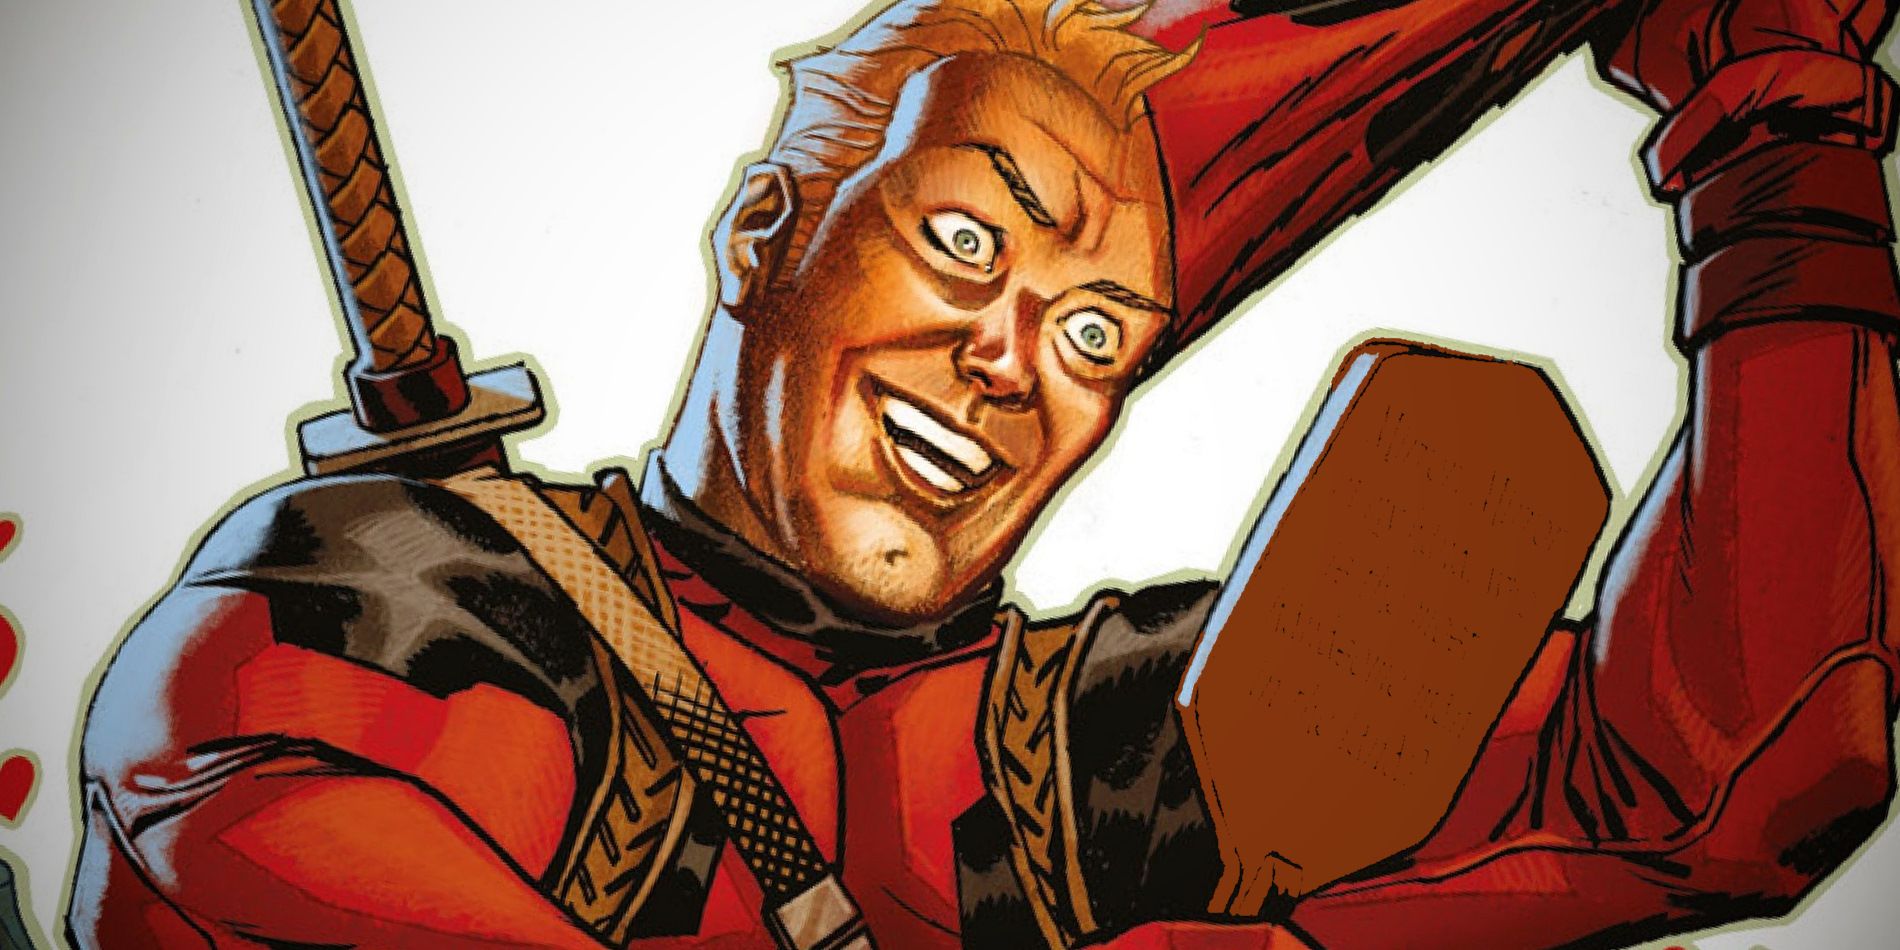 Deadpool with his face healed in Marvel Comics